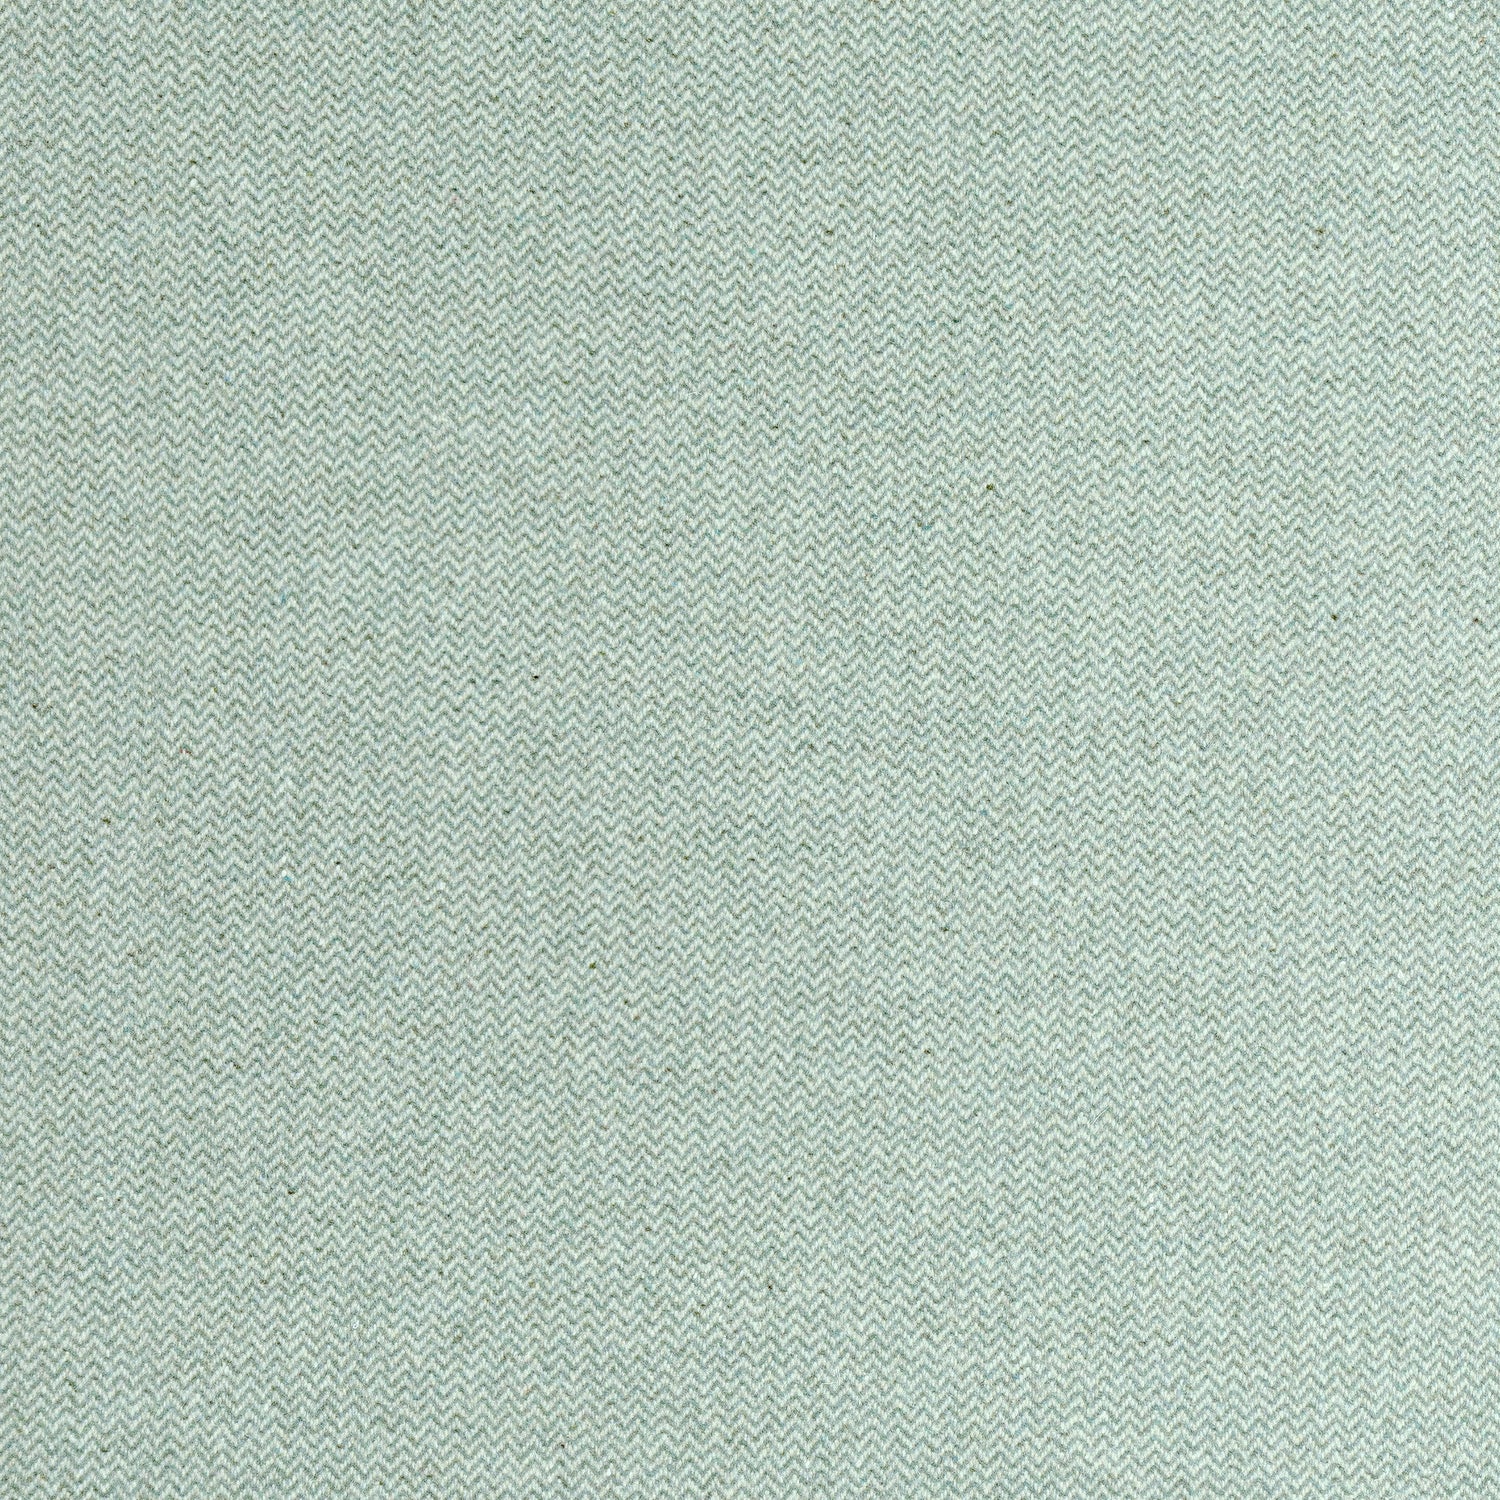 Dorset fabric in loden color - pattern number W80909 - by Thibaut in the Dunmore collection